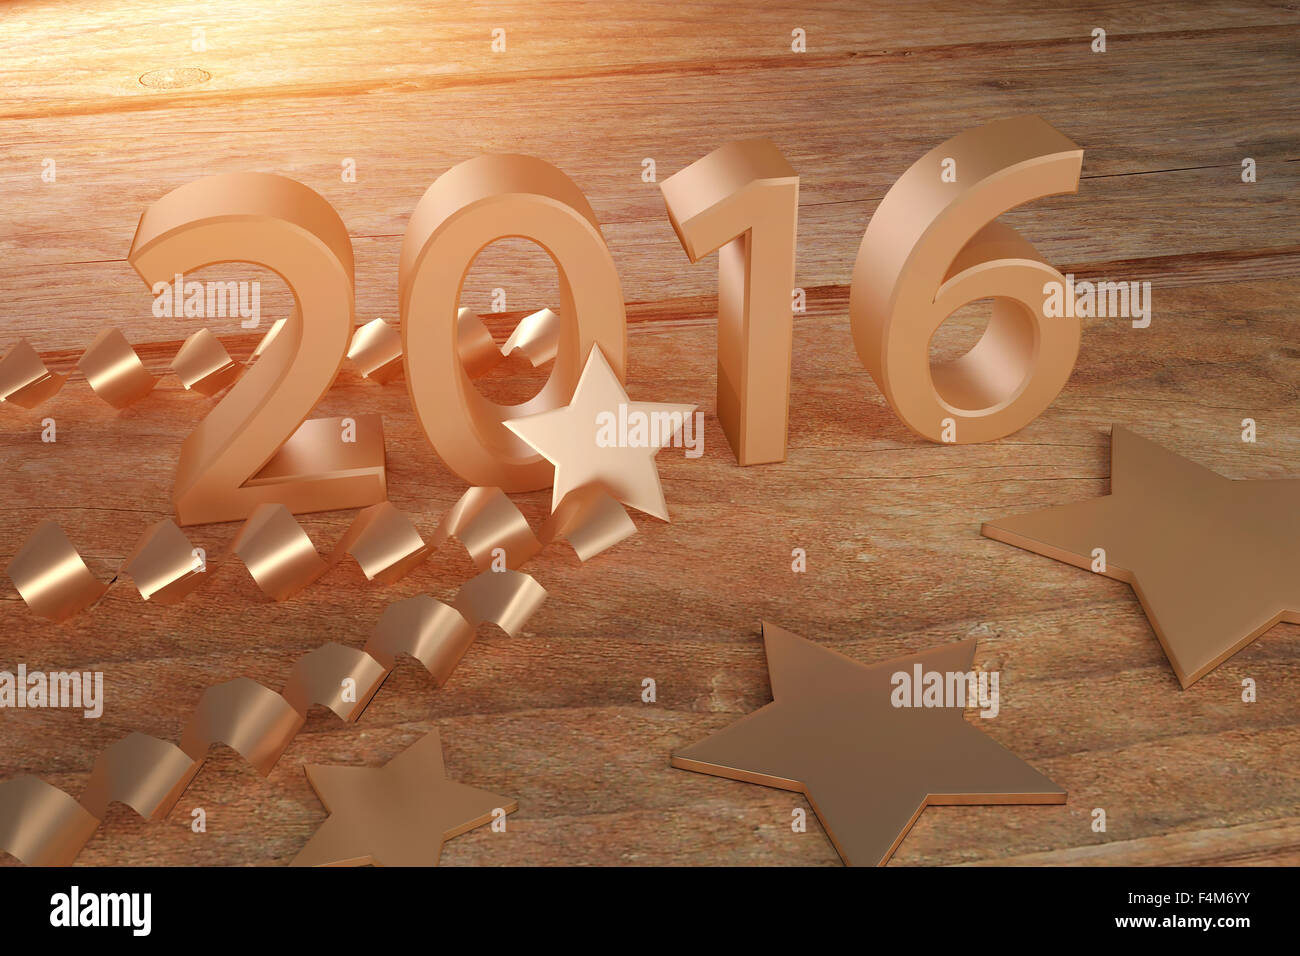 New Year Concept 2016 Stock Photo